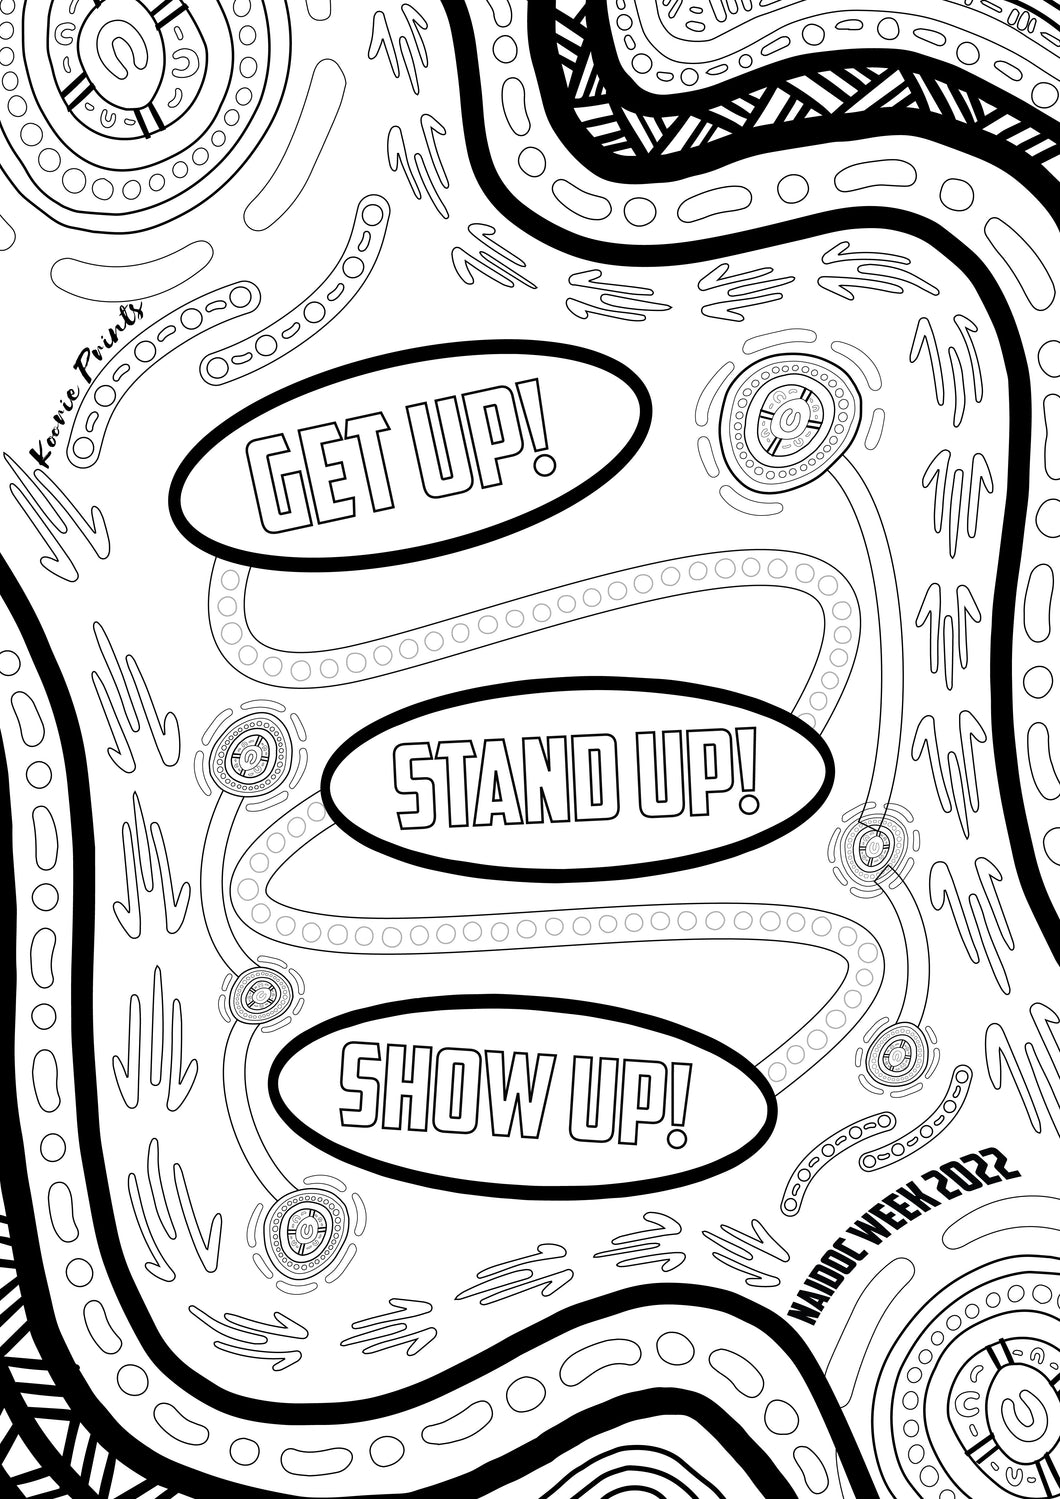 FREE Get Up Stand Up Show Up Colouring Page (Printable, digital download)